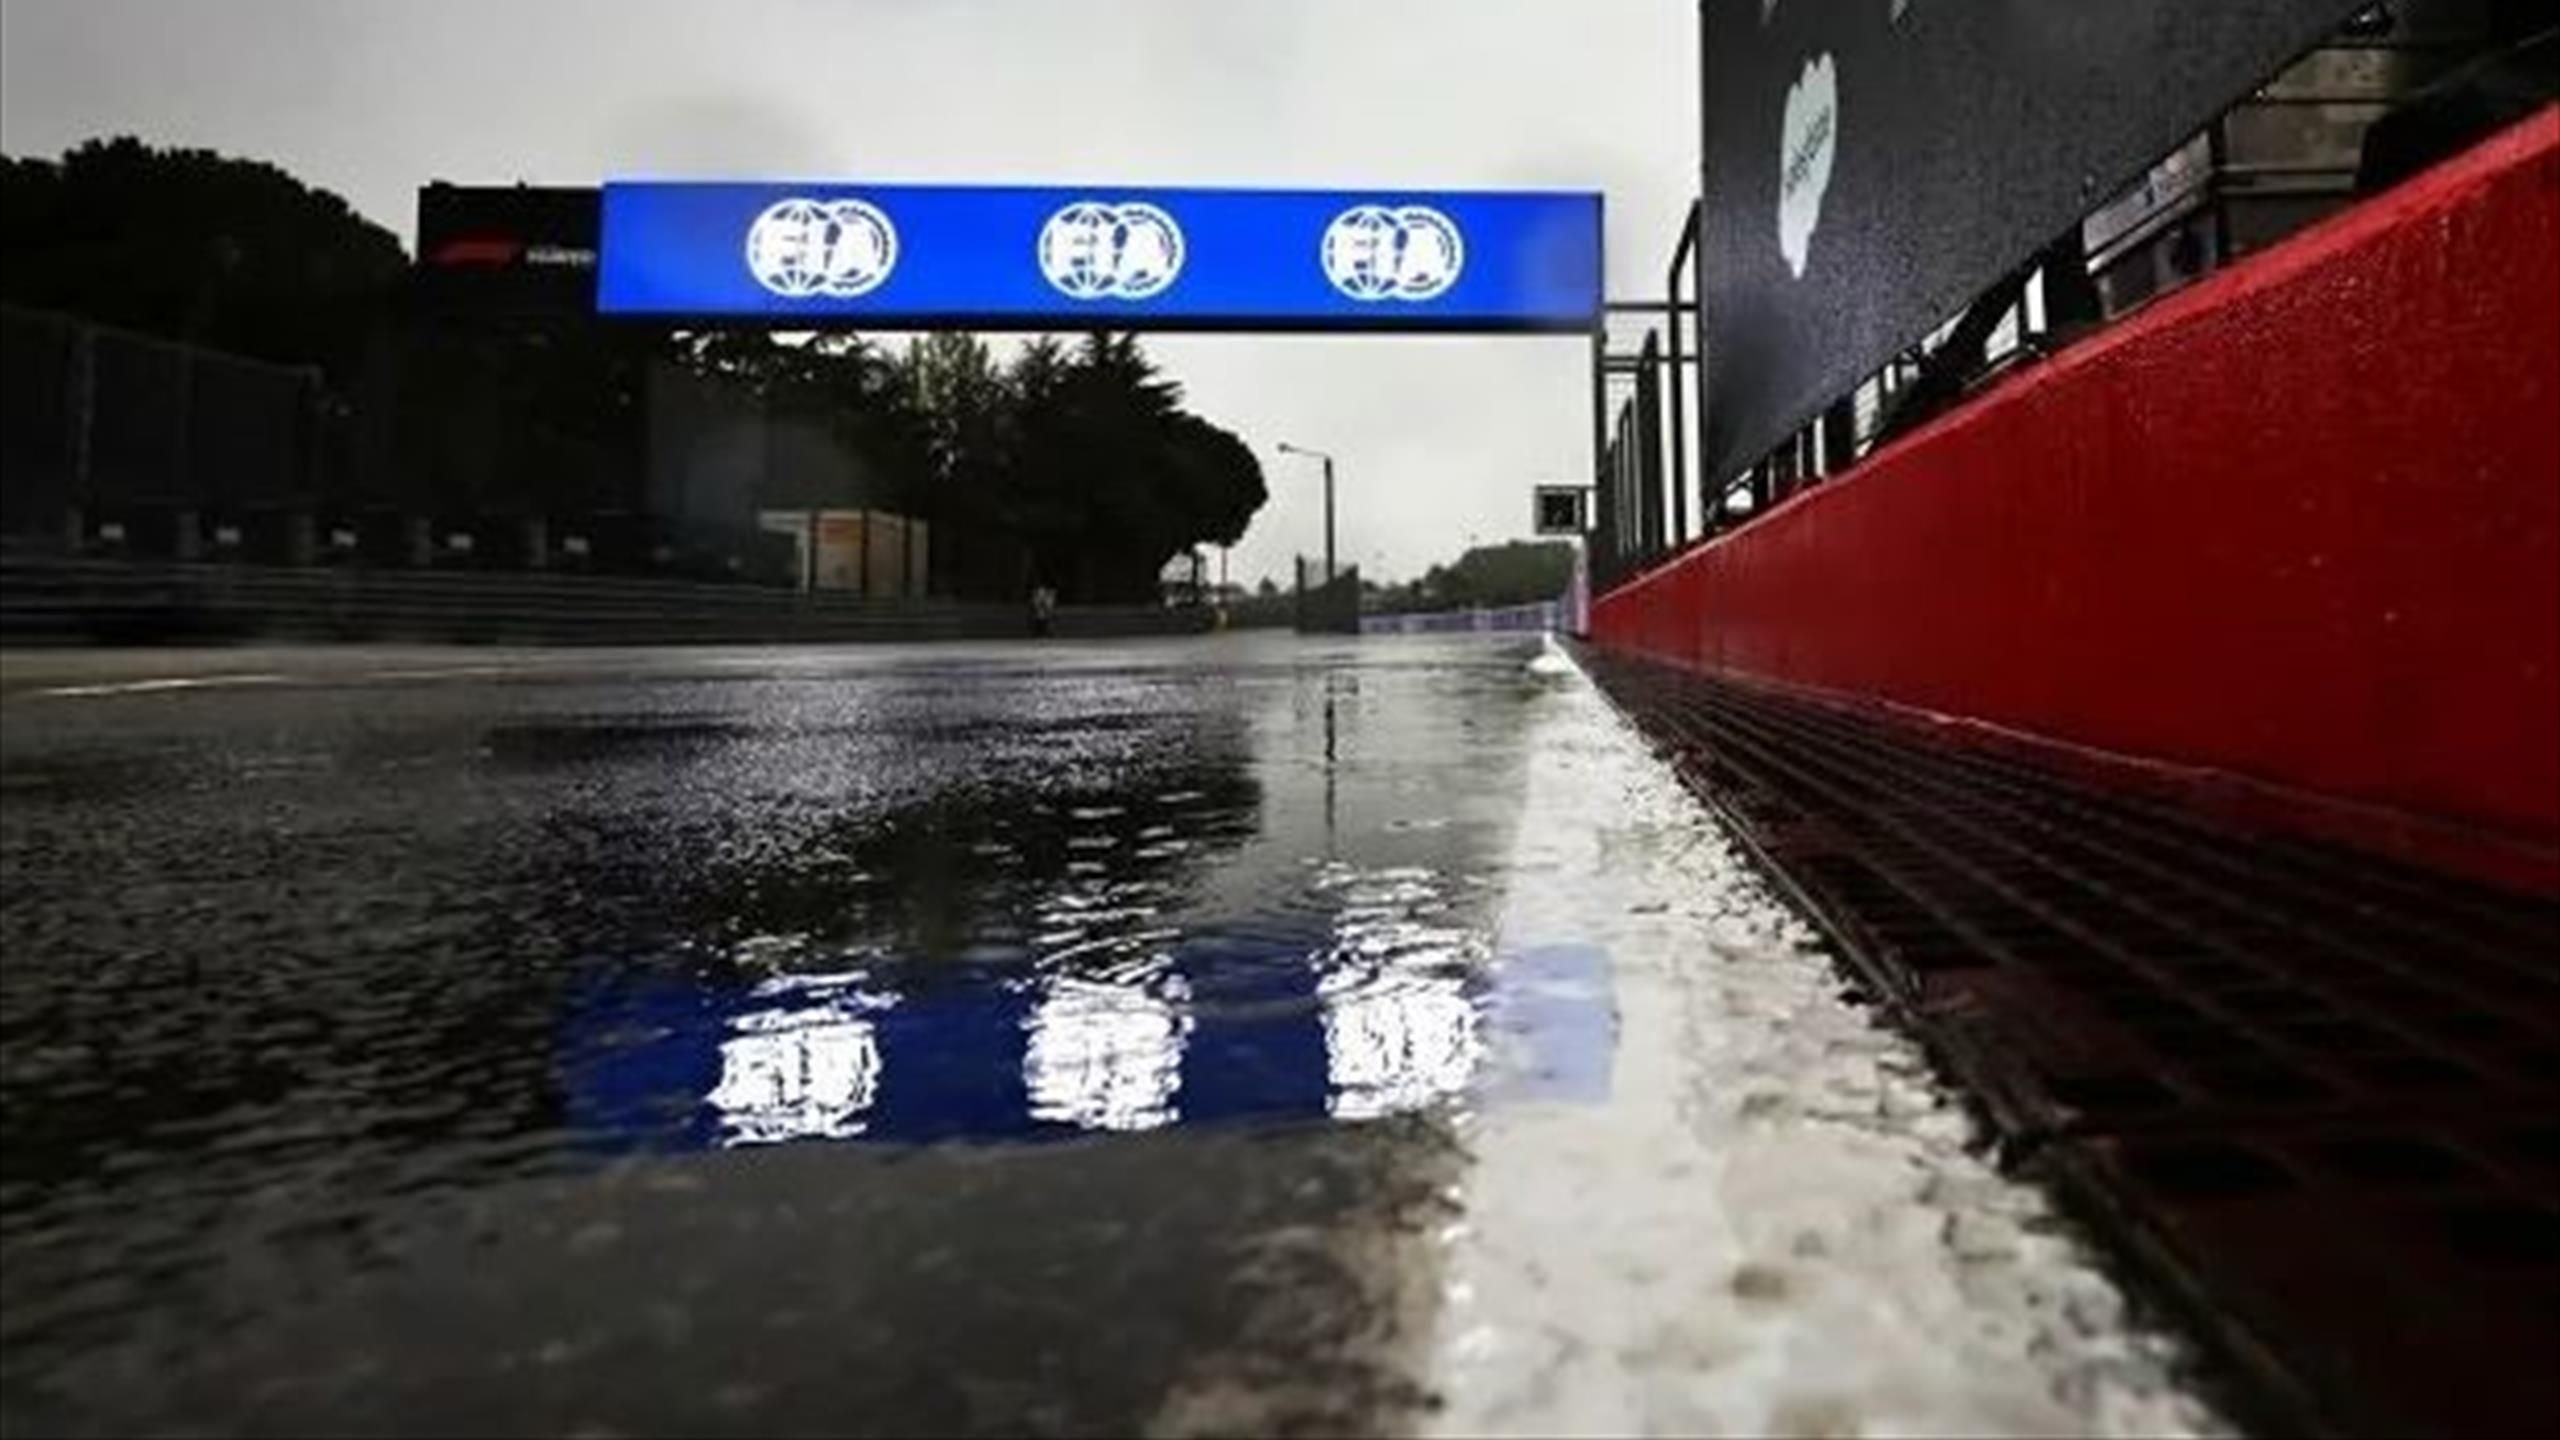 Emilia Romagna Grand Prix cancelled due to severe flooding as F1 president addresses tragedy in northern Italy